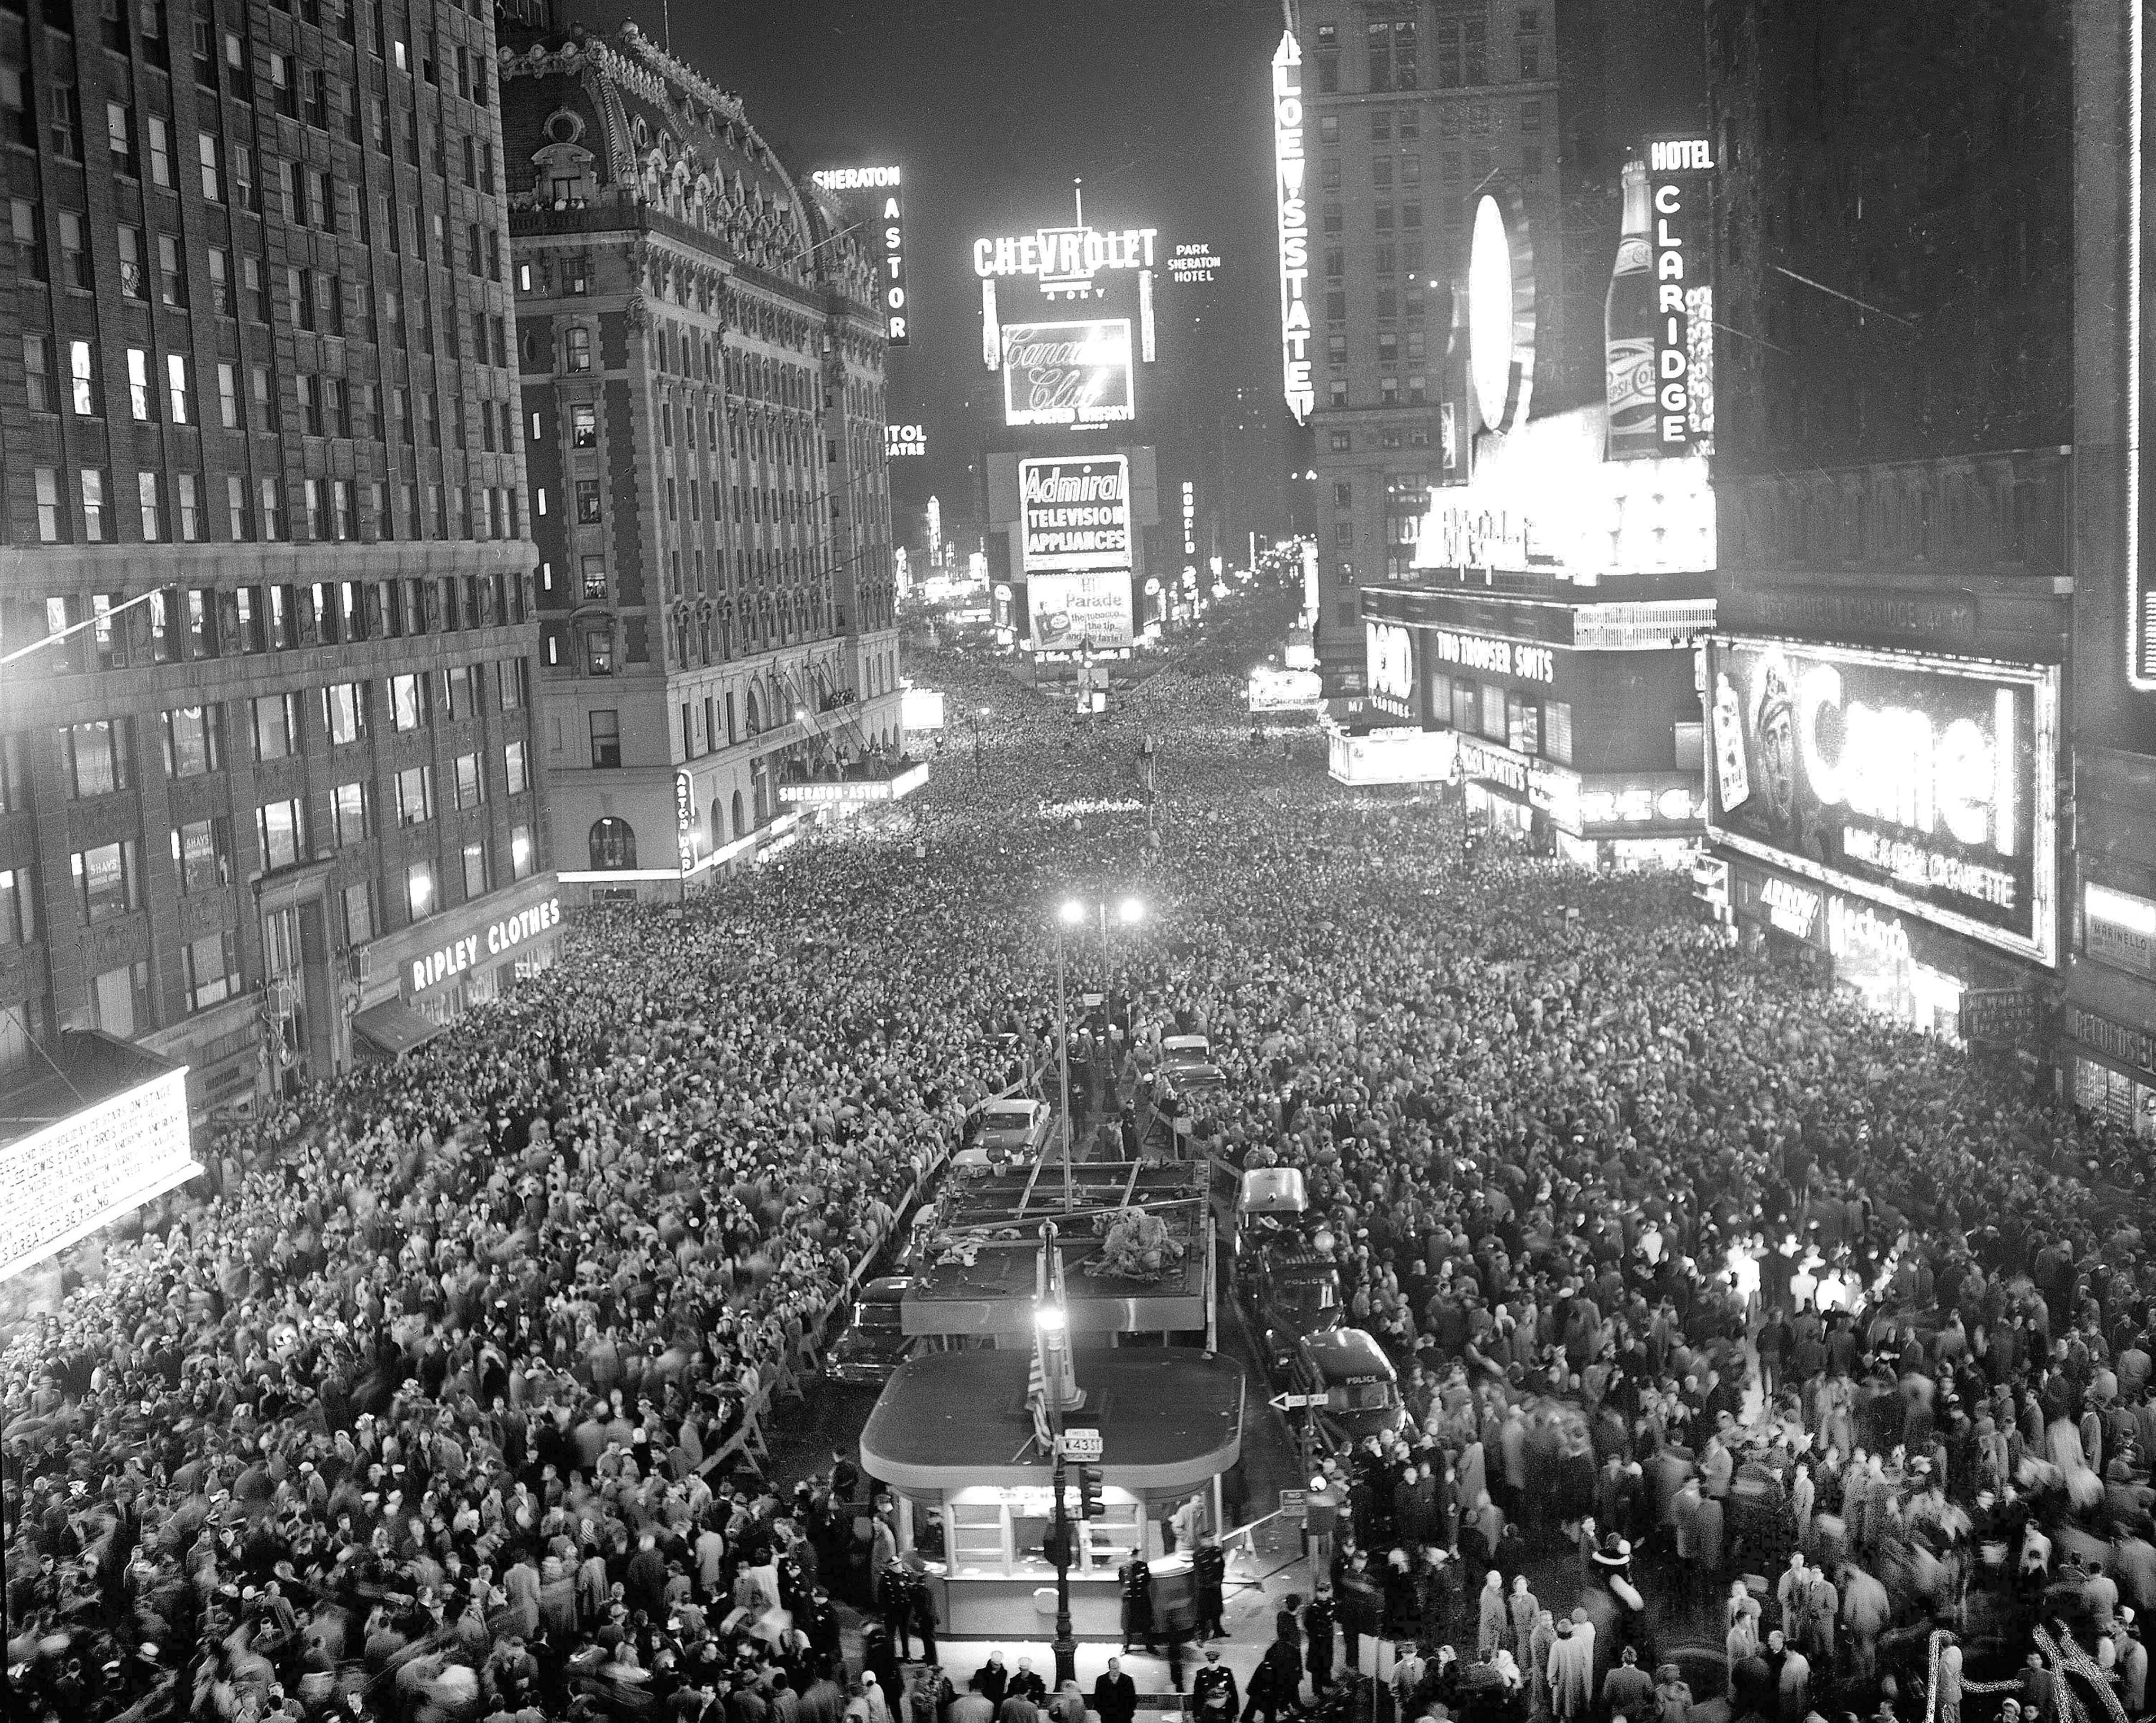  350,000 revelers gather to welcome the new year in New York&#039;s Times Square, Jan. 1, 1958